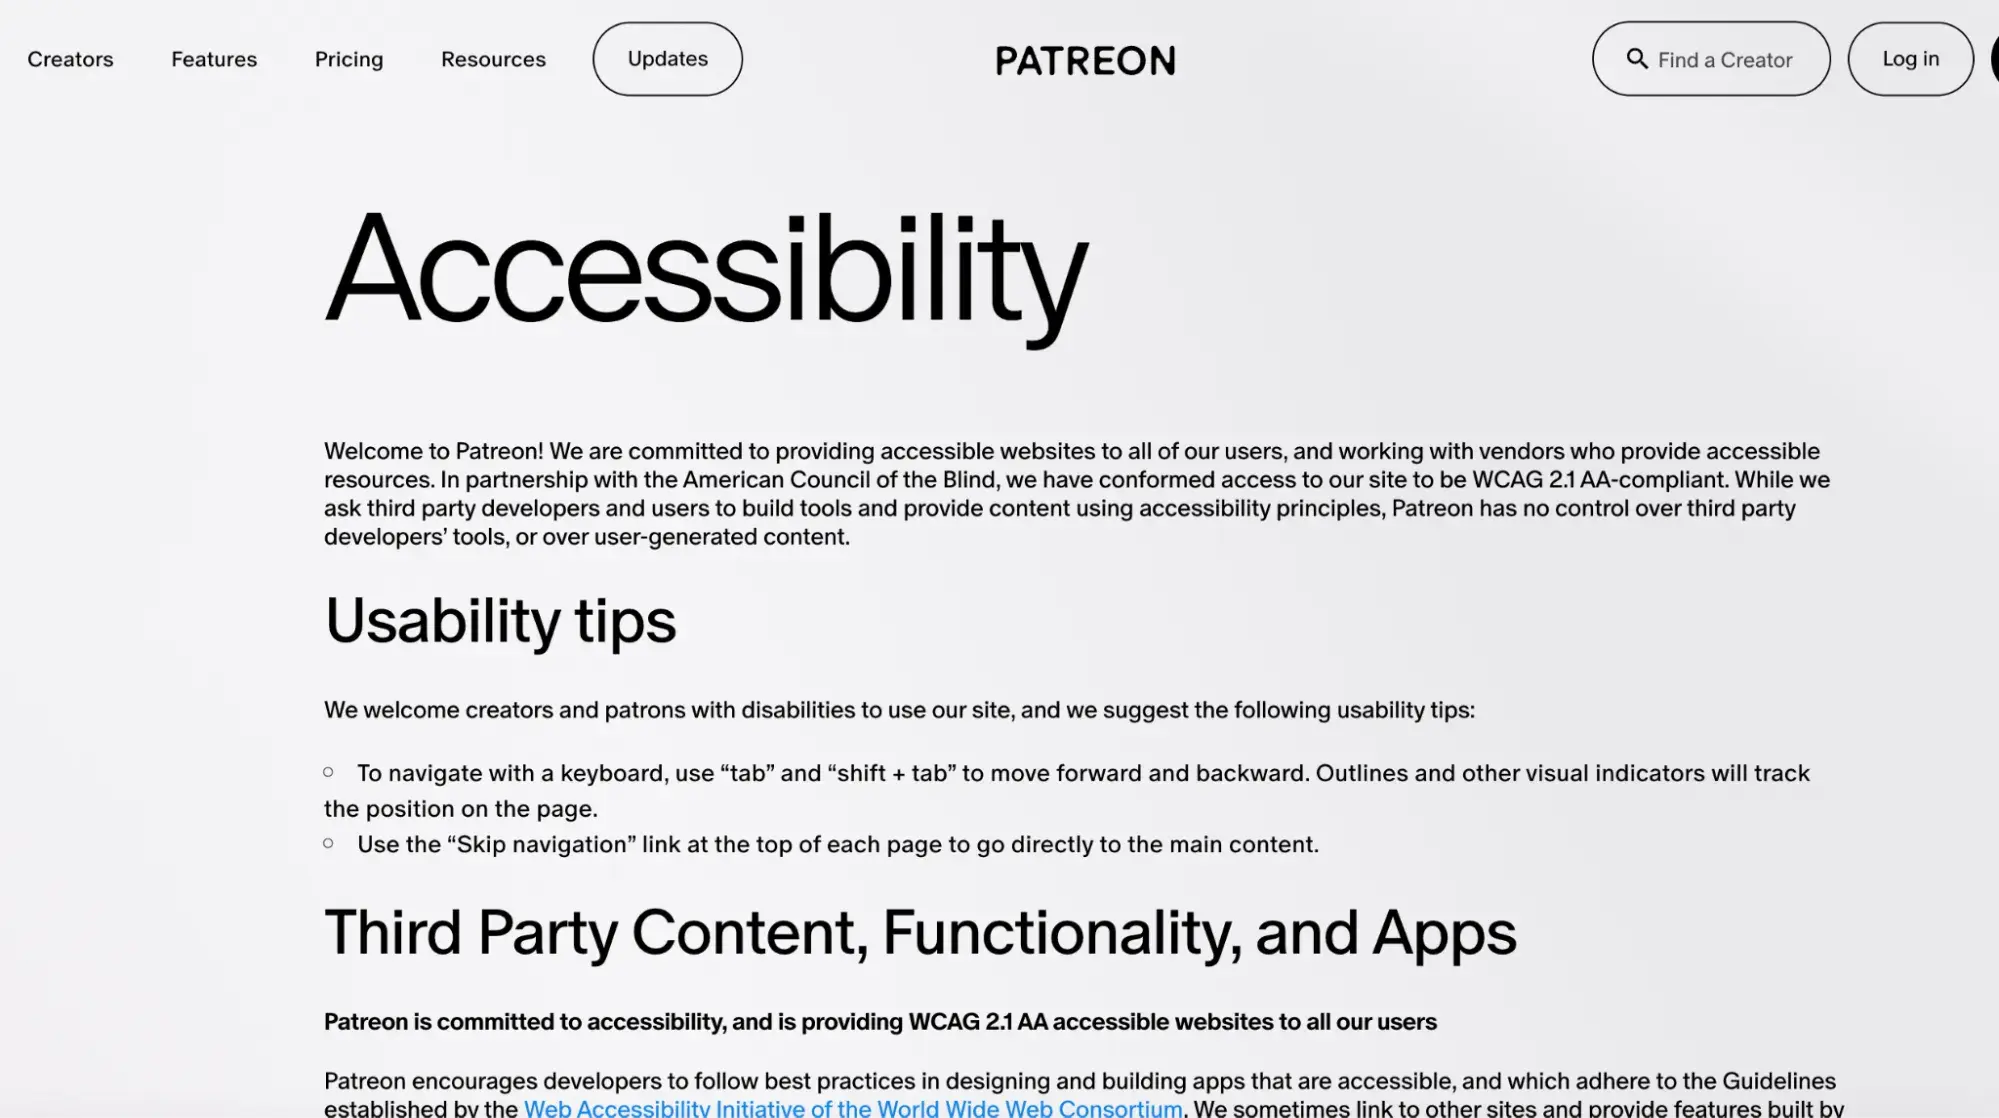 Patreon’s accessibility page explains how you can use the site’s accessibility features